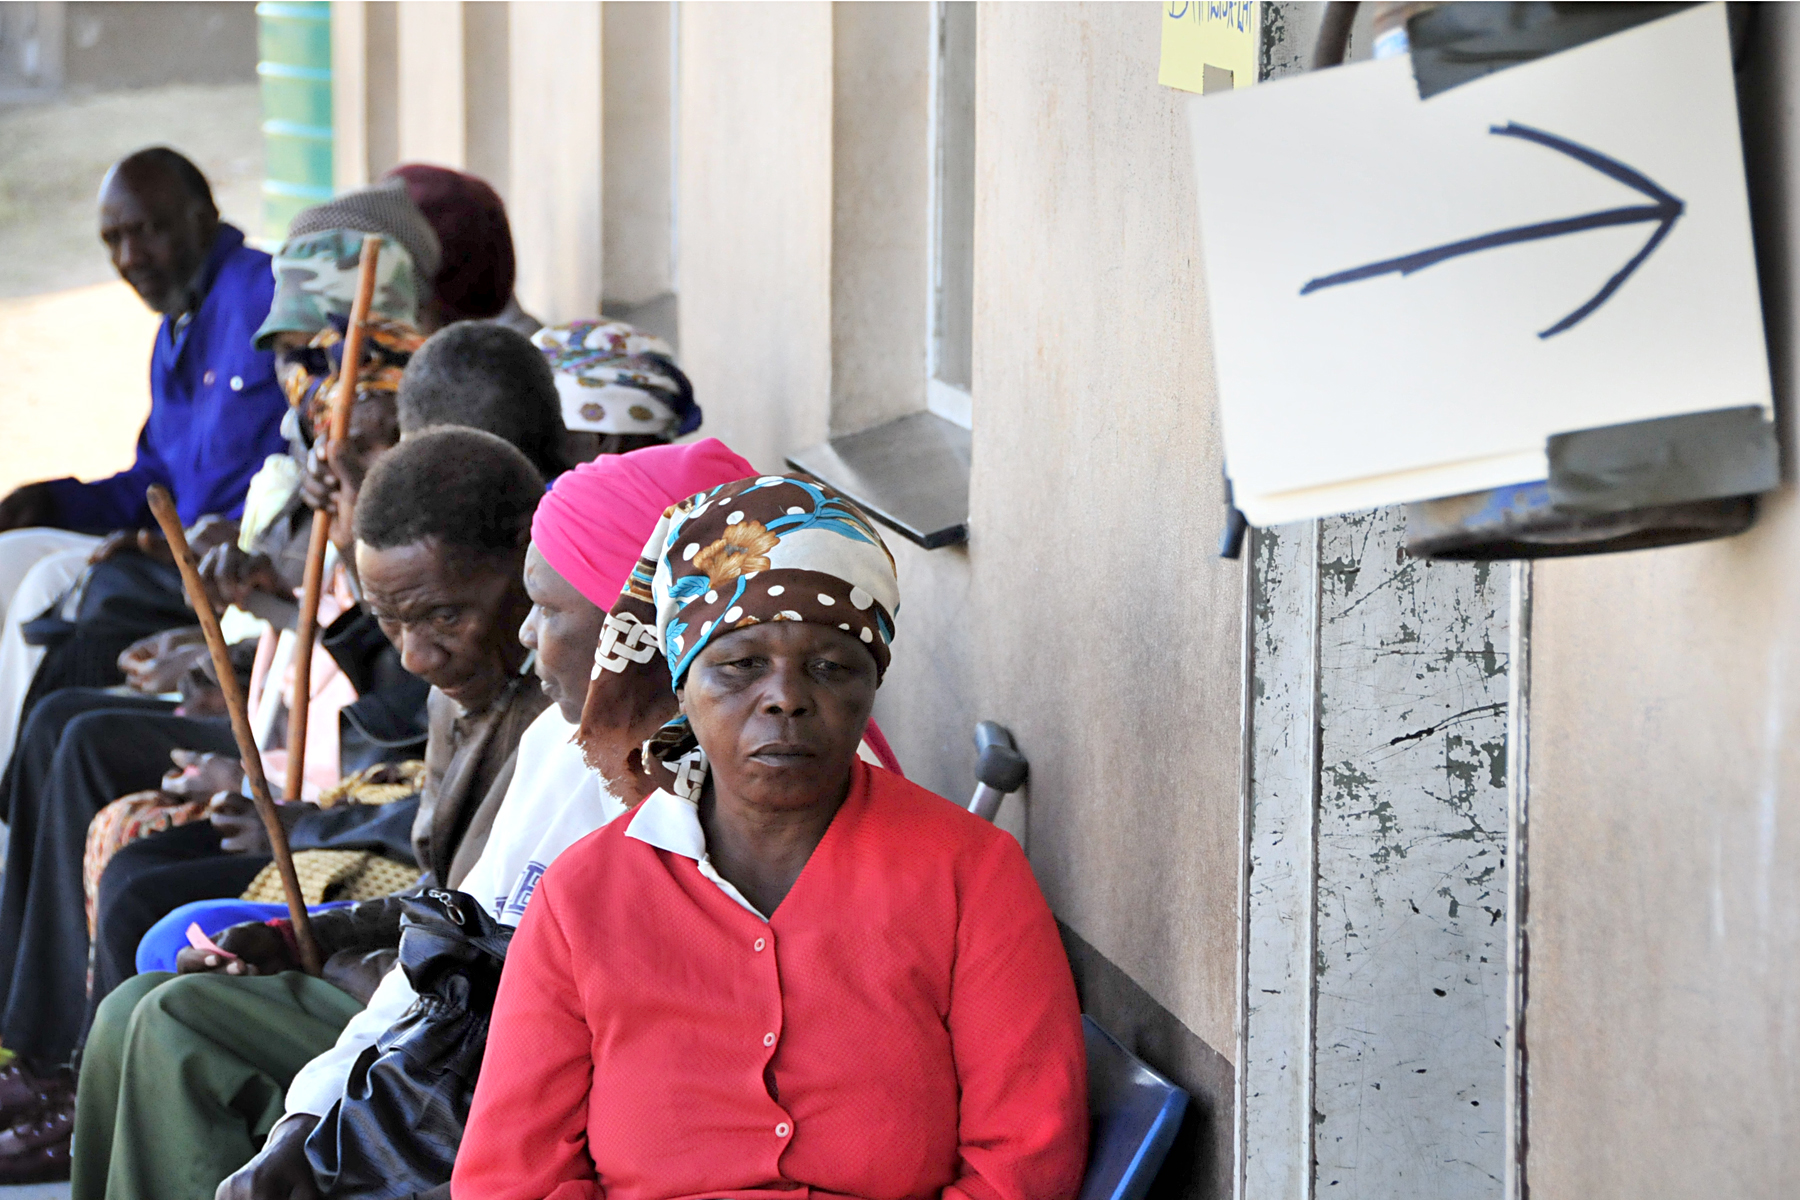 Public health services in Swaziland